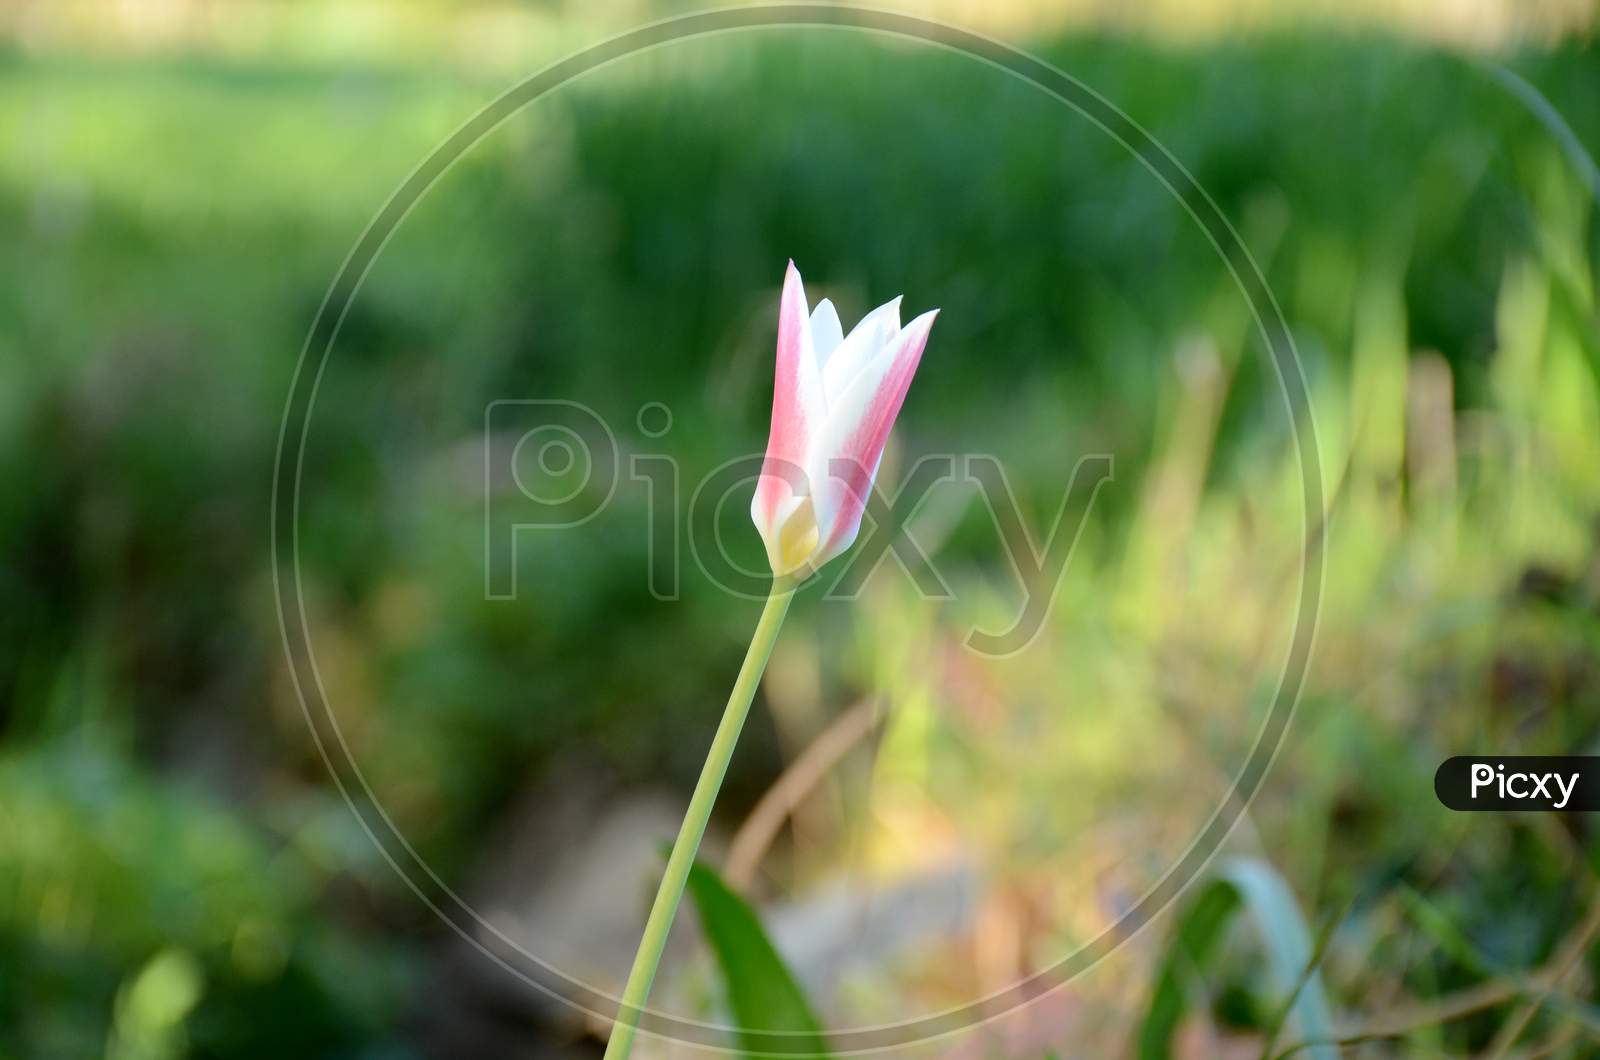 The Pink White Rain Lily Flower With Plant Growing In The Garden.